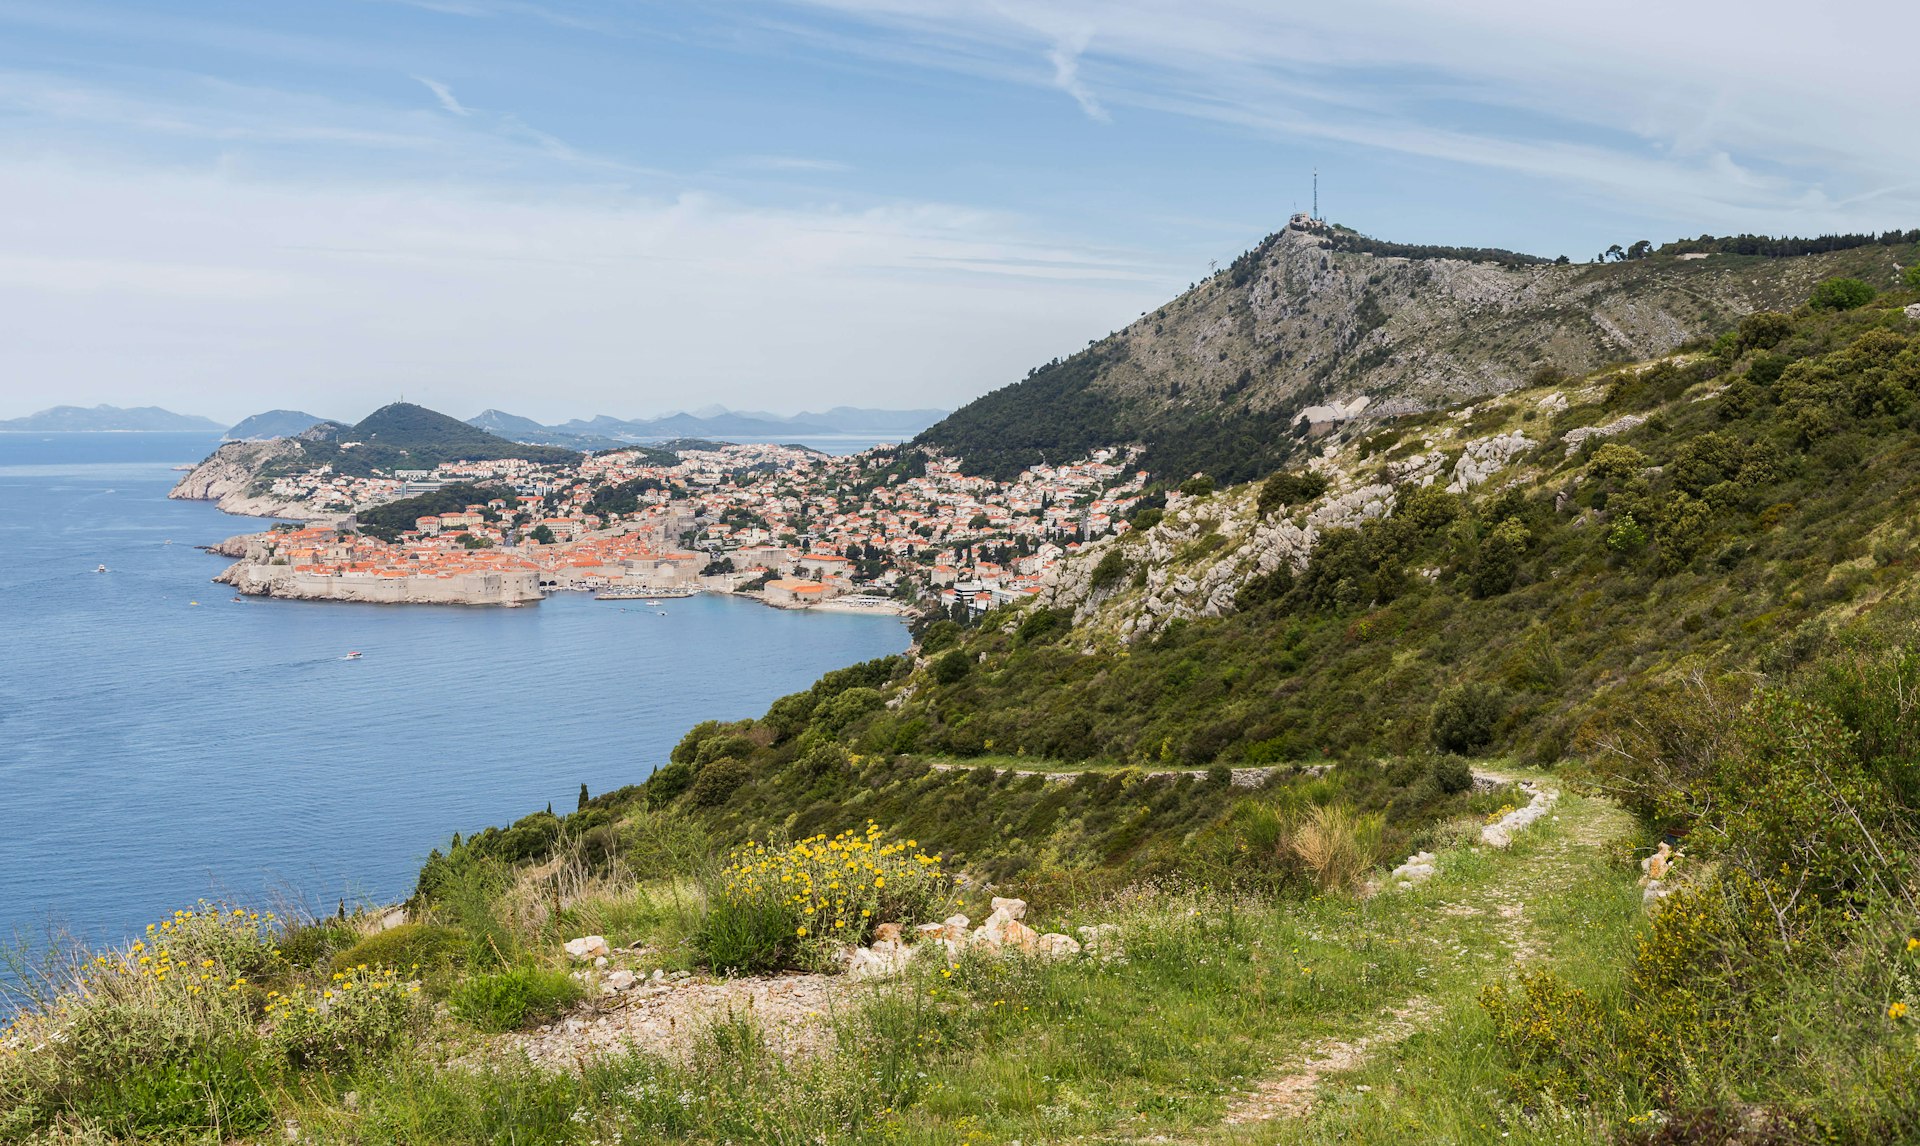 The breathtaking views of Dubrovnik's beautiful old town seen from Park Orsula